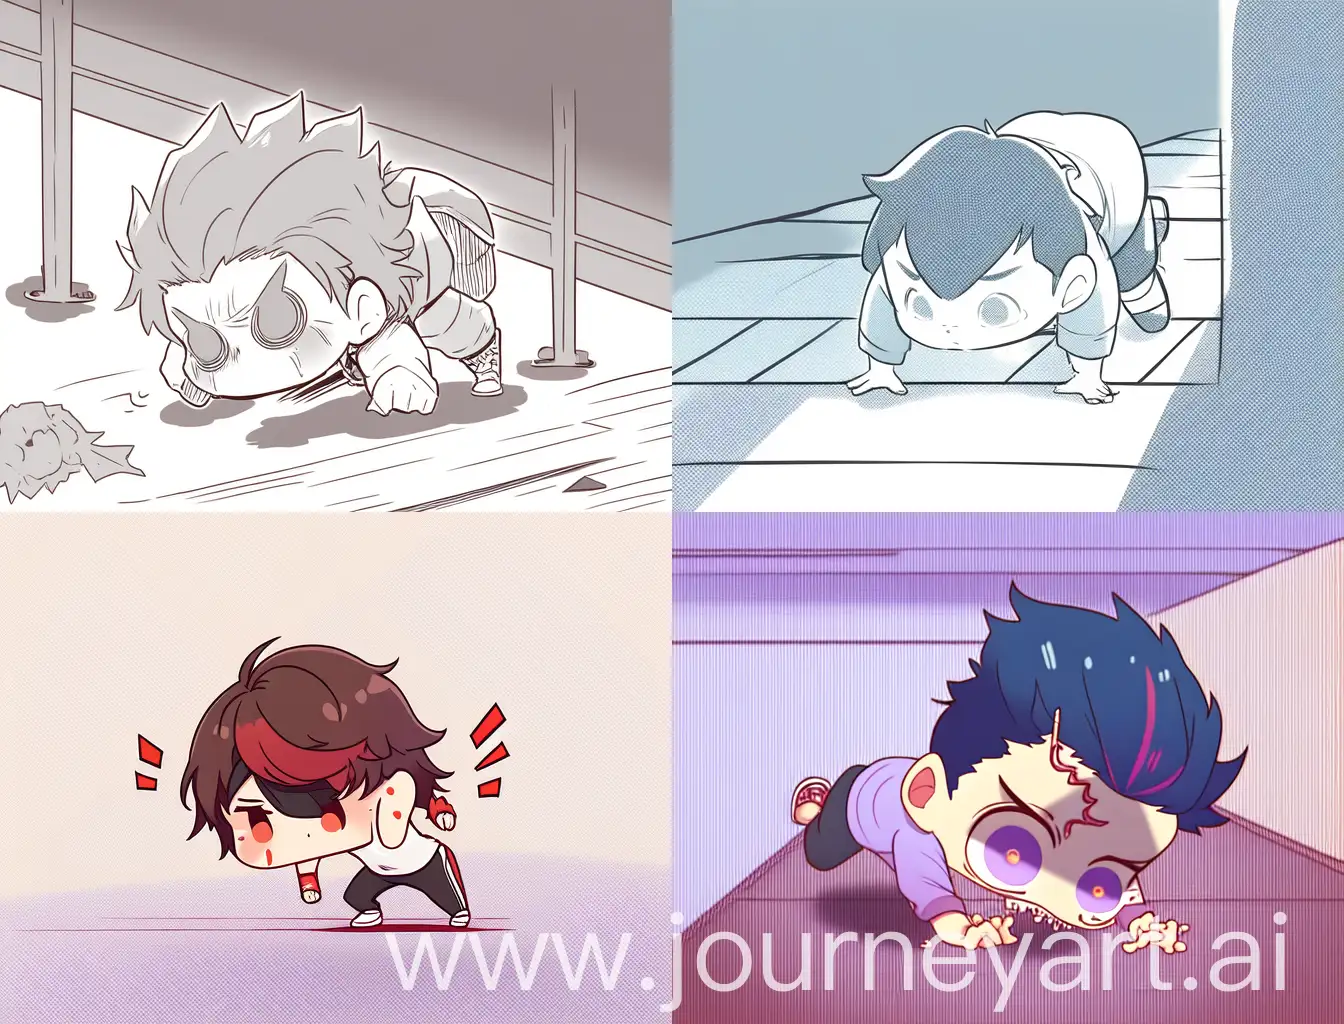 Chibi-Boy-Doing-PushUp-with-Horror-Background-in-Cartoon-Anime-Style